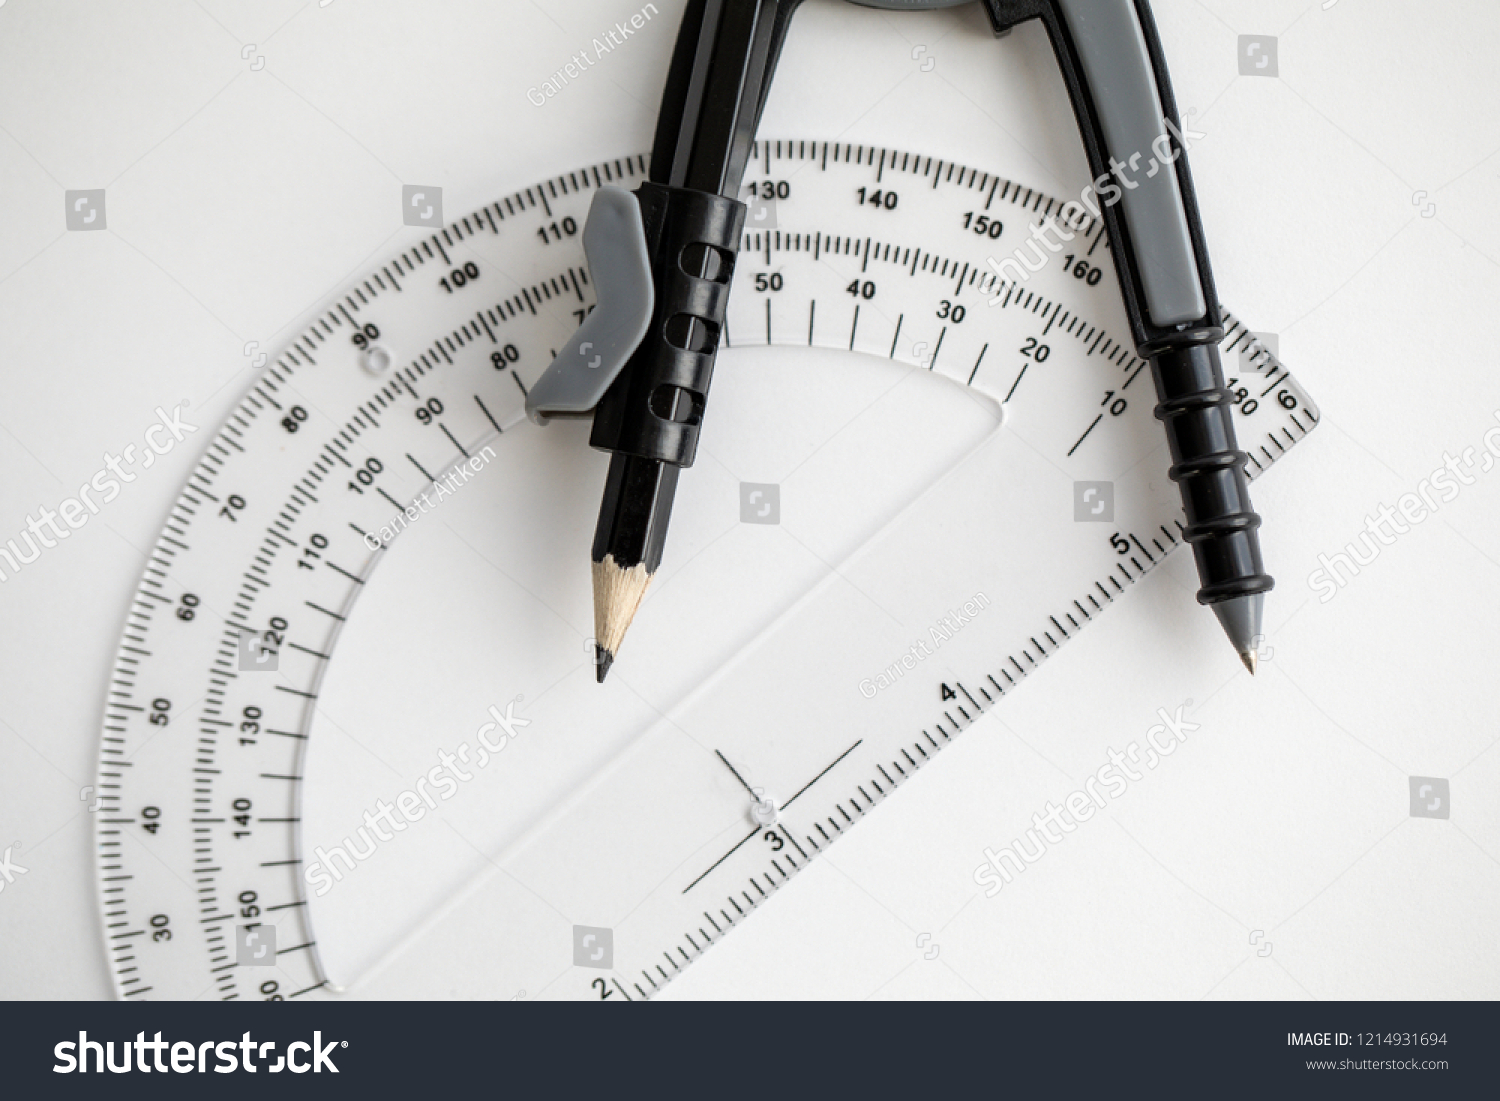 Compass Protractor Math Engineers Architects Stock Photo (Edit Now ...